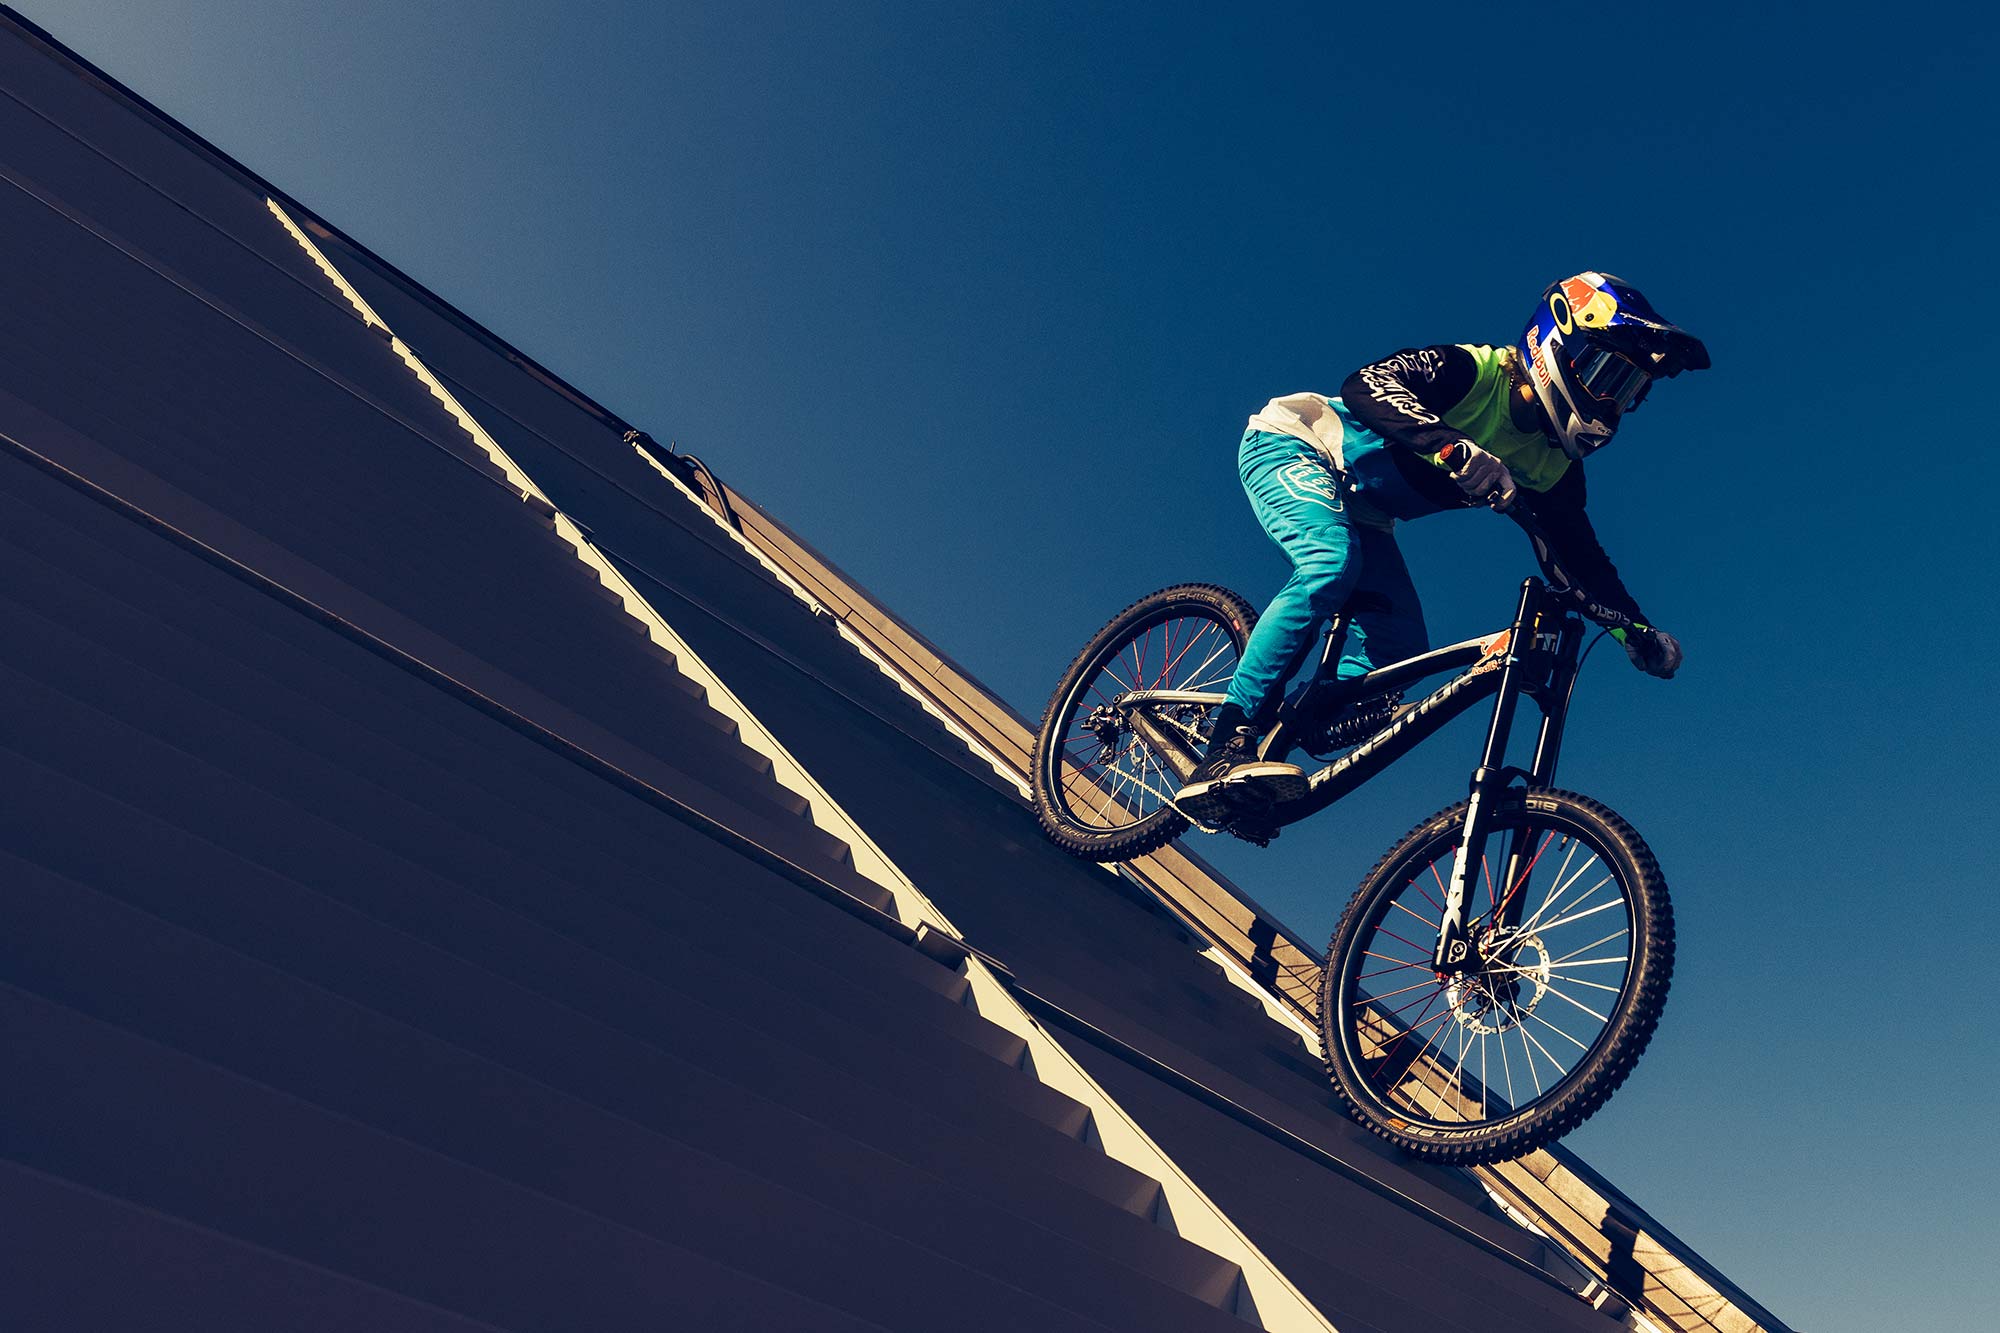 Red Bull Rampage drops off a building for context - Bikerumor